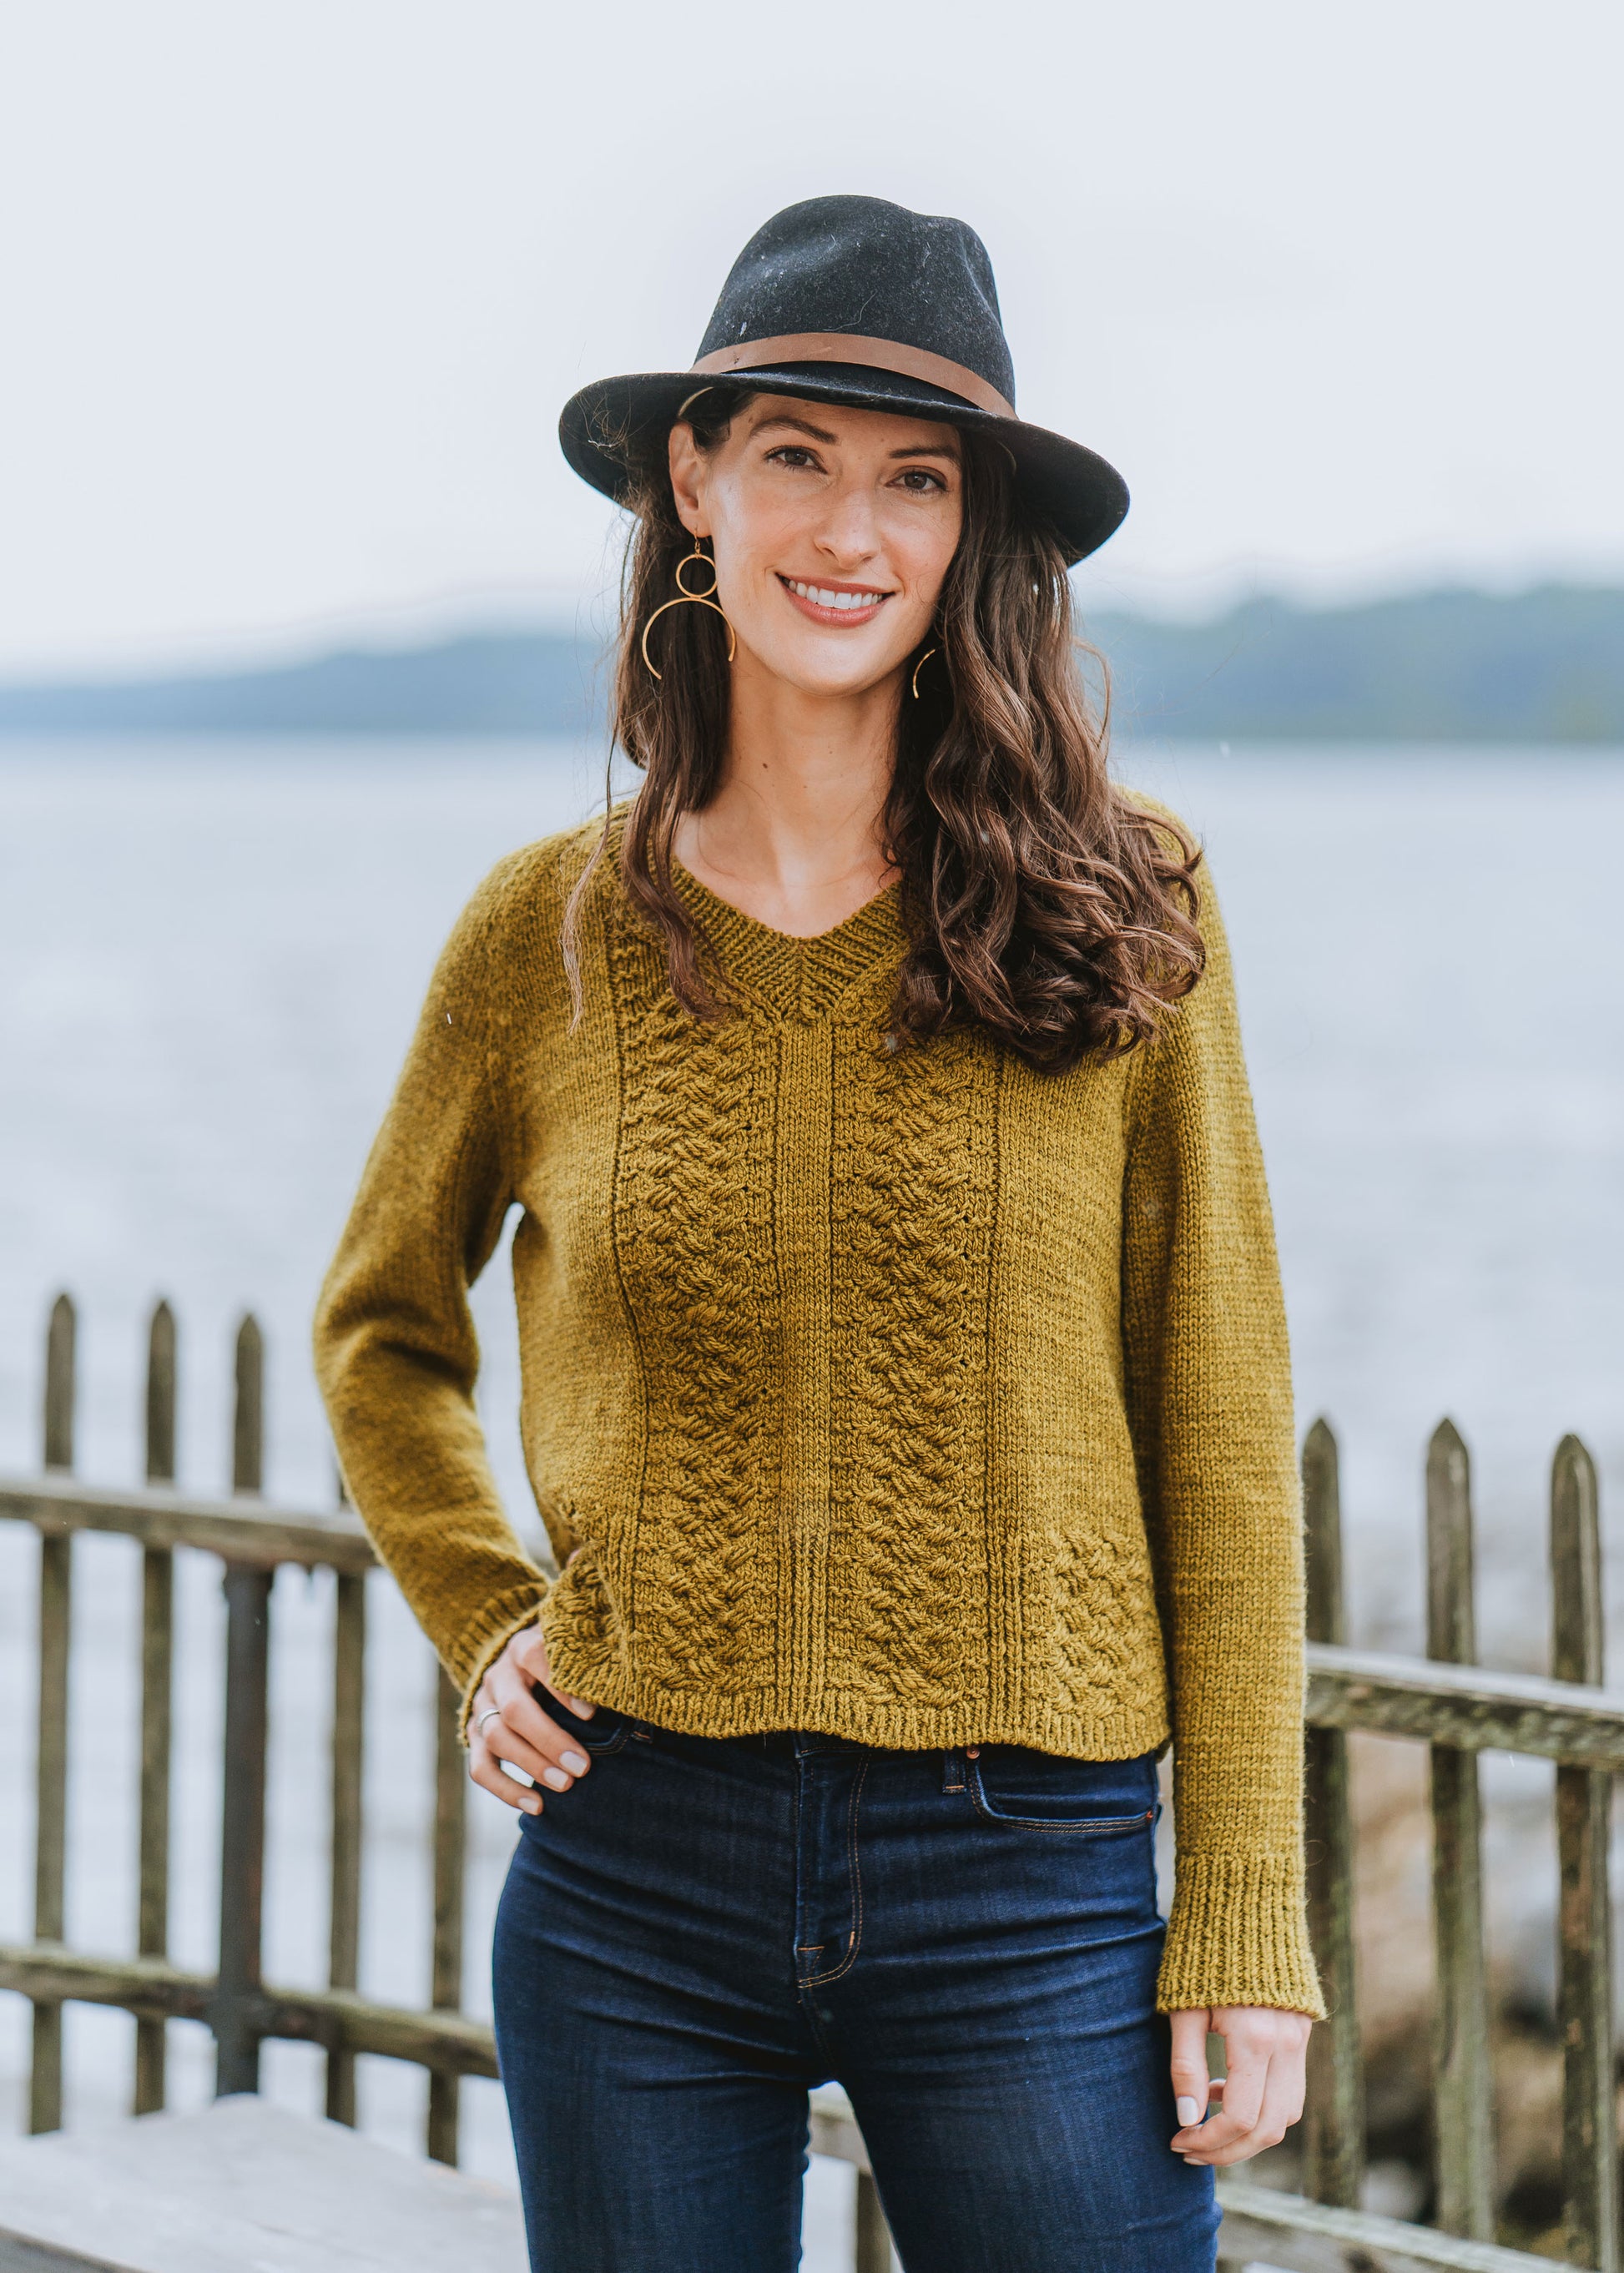 Laura, a woman with long brunette hair, stands in front of a short fence, a body of water and hills in the background. She wears a hand knit sweater featuring two cable strips down the front and a V-neck.